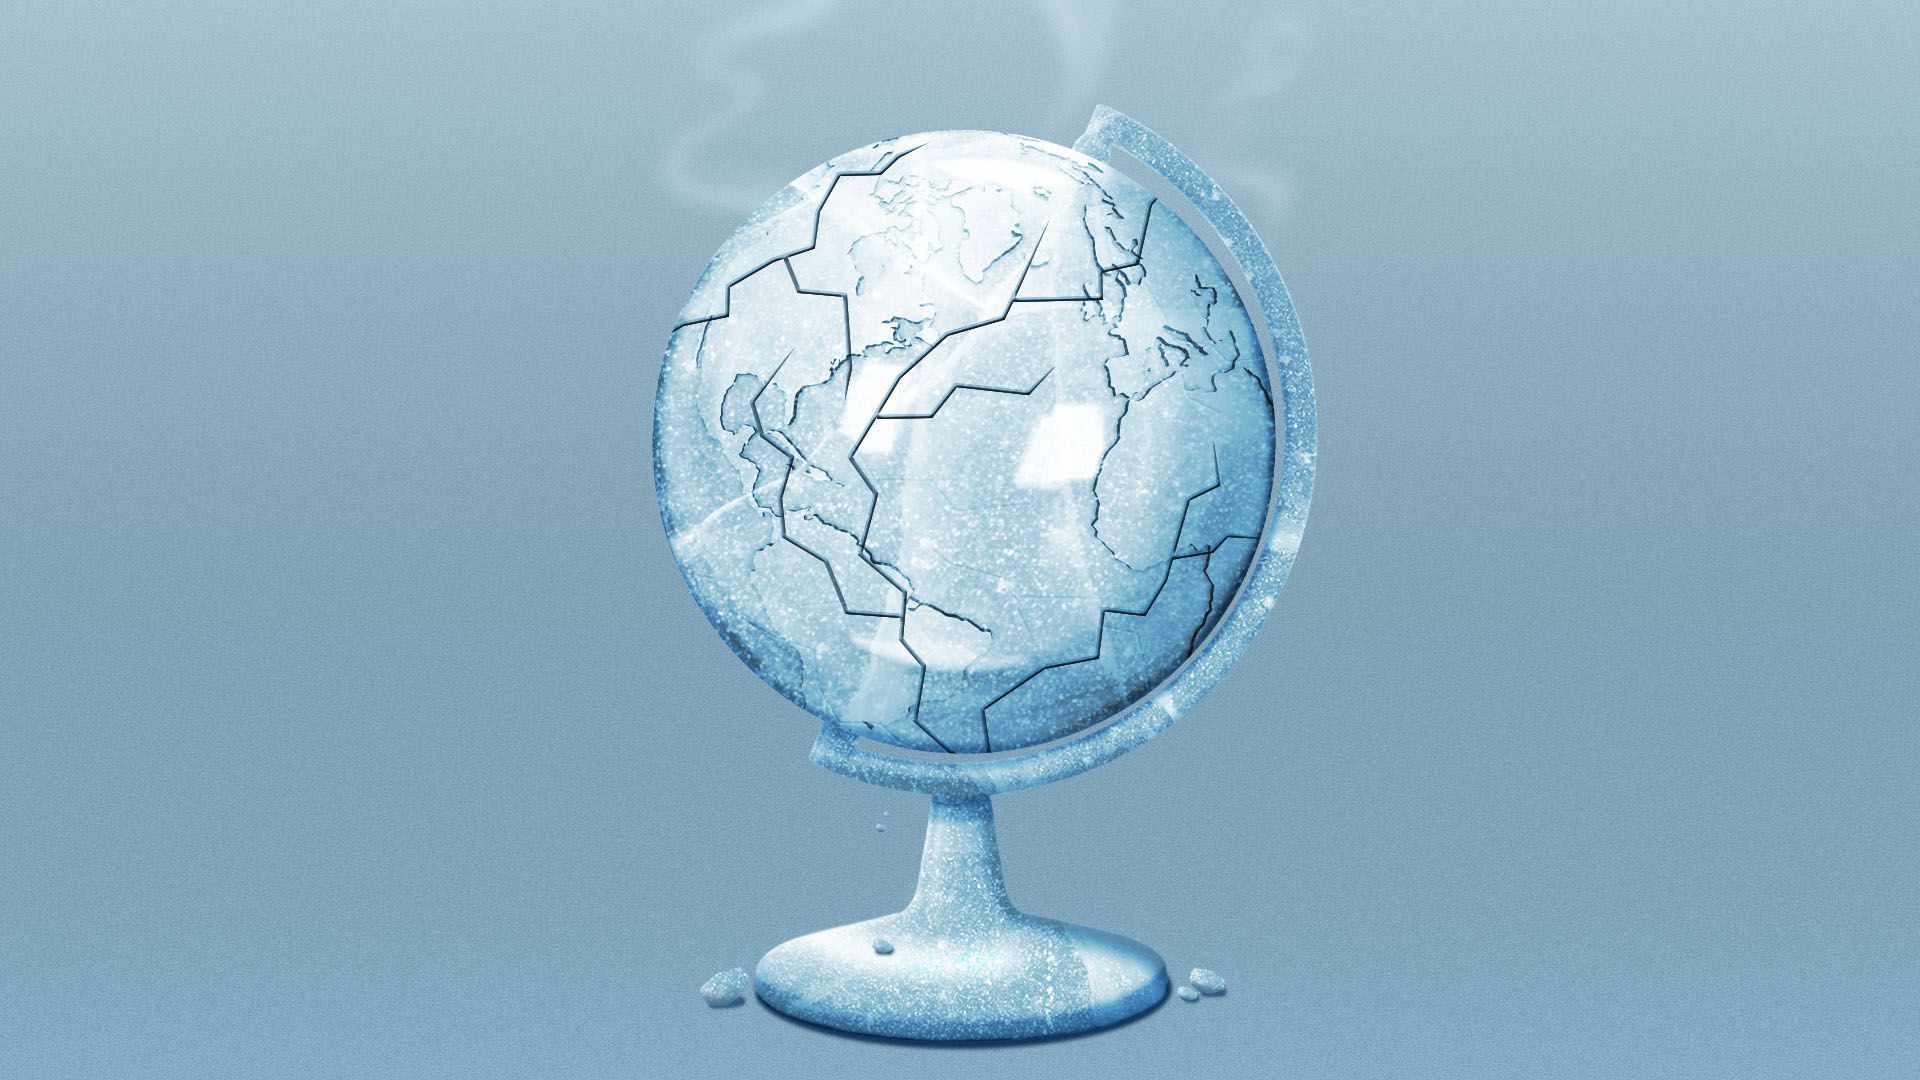 Illustration of an globe made of ice with cracks in it